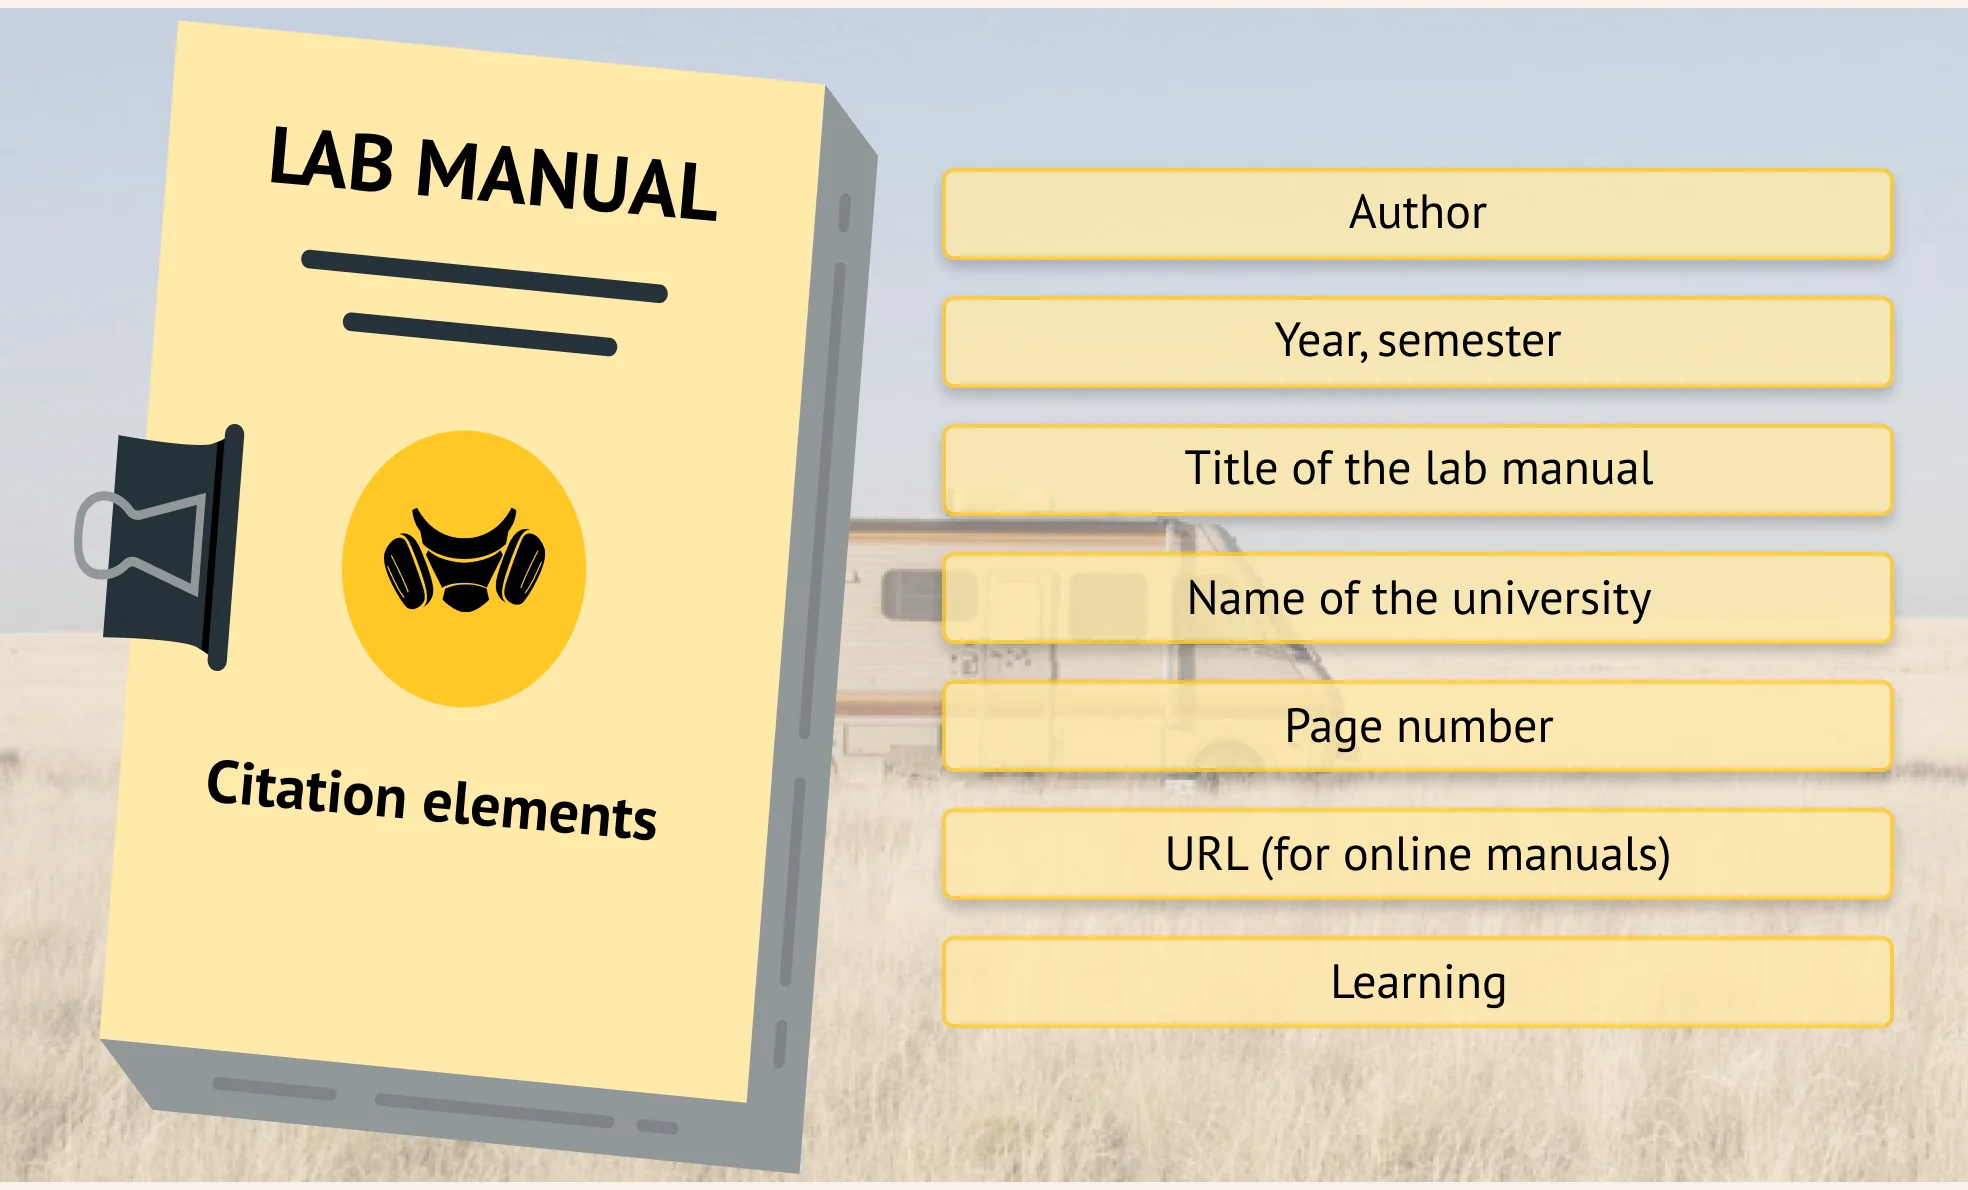 An image listing citation's elements required for lab manuals